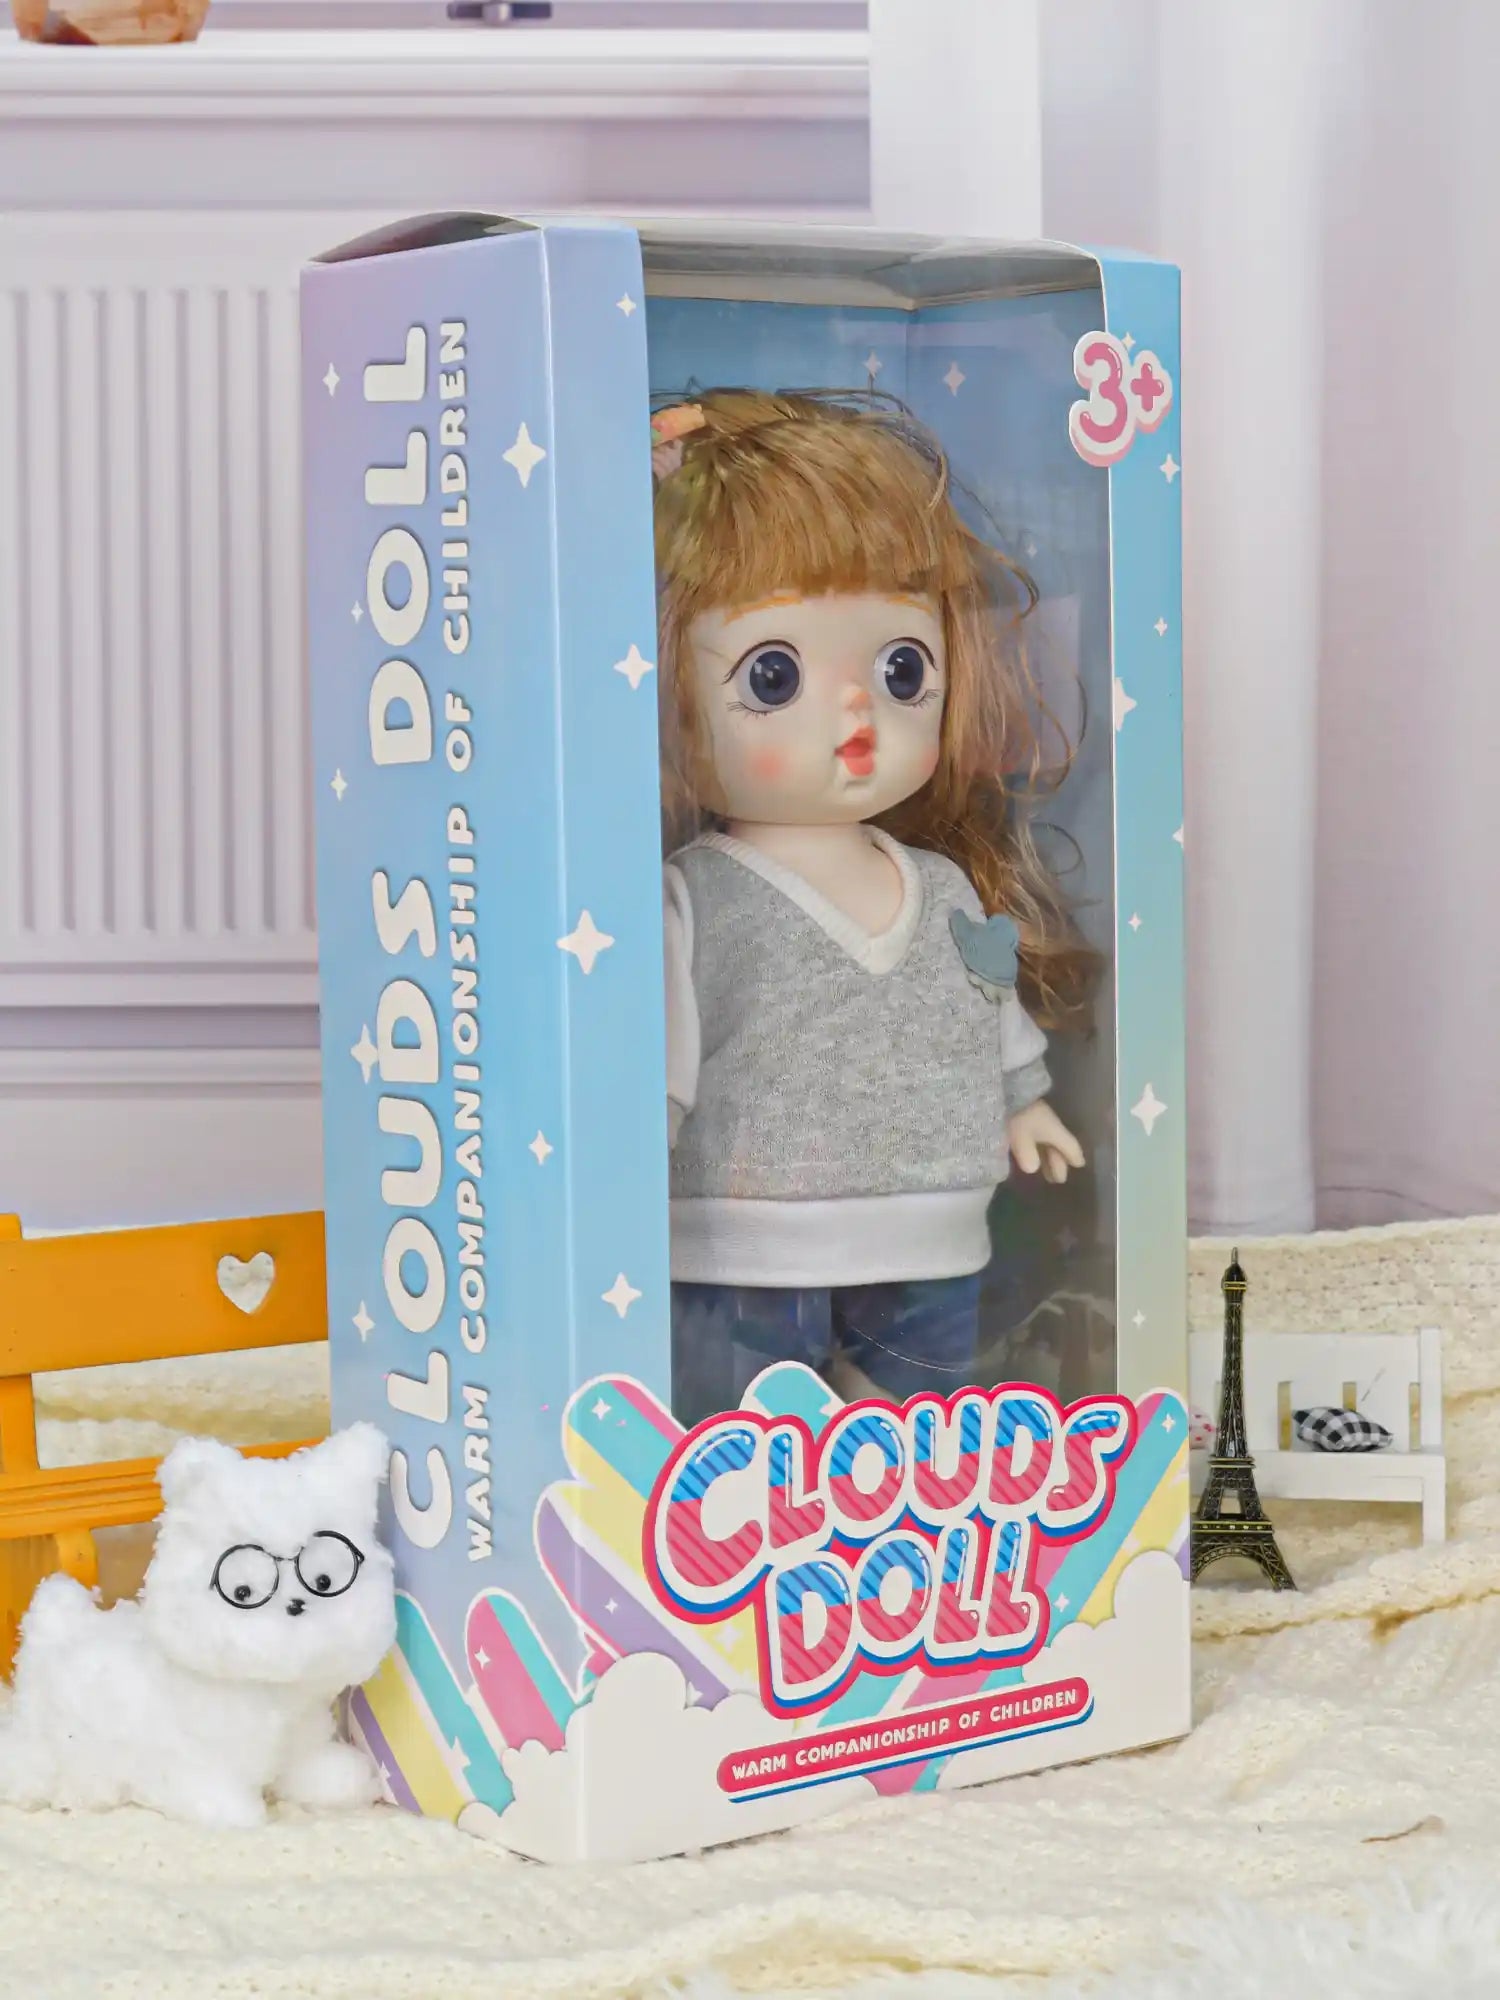 Adorable fashion doll with a side ponytail, complemented by a quirky white toy dog with gold-rimmed glasses.